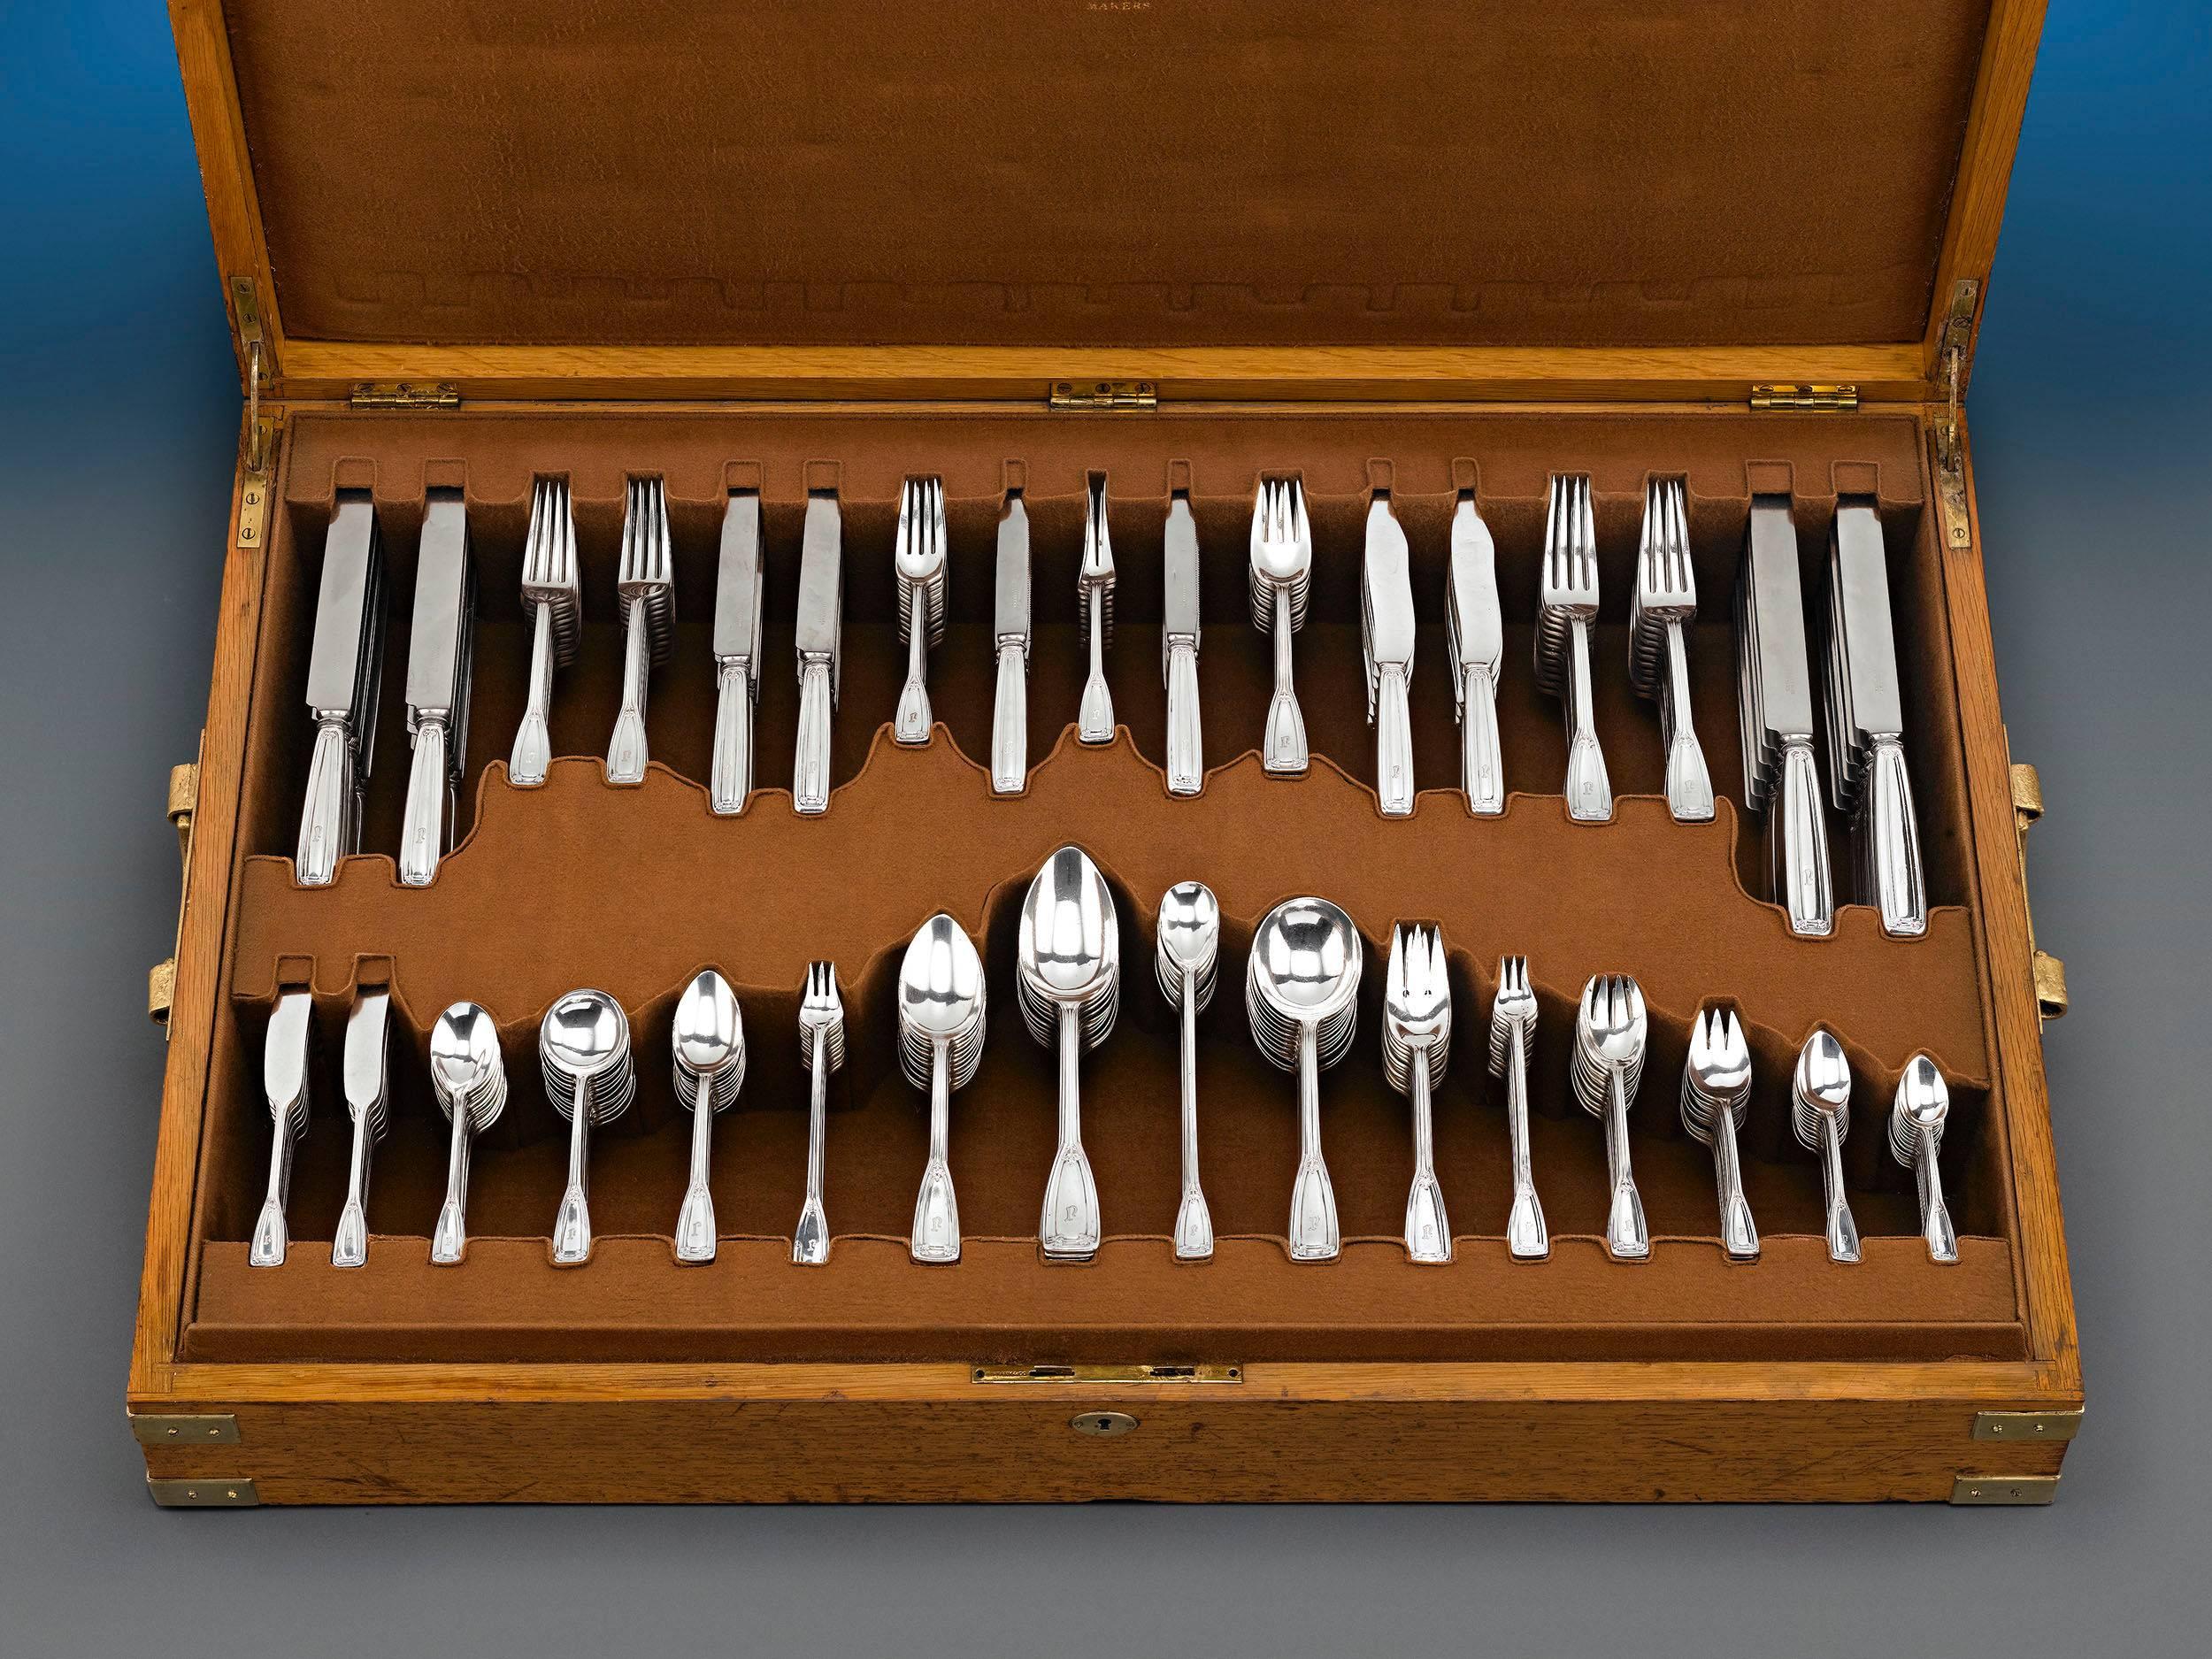 This magnificent antique 324-piece Tiffany & Co. sterling flatware service boasts the classic St. Dunstan pattern. Patented in 1909, this well-loved design is named for St. Dunstan, the patron saint of gold and silversmiths. It exhibits a subtle